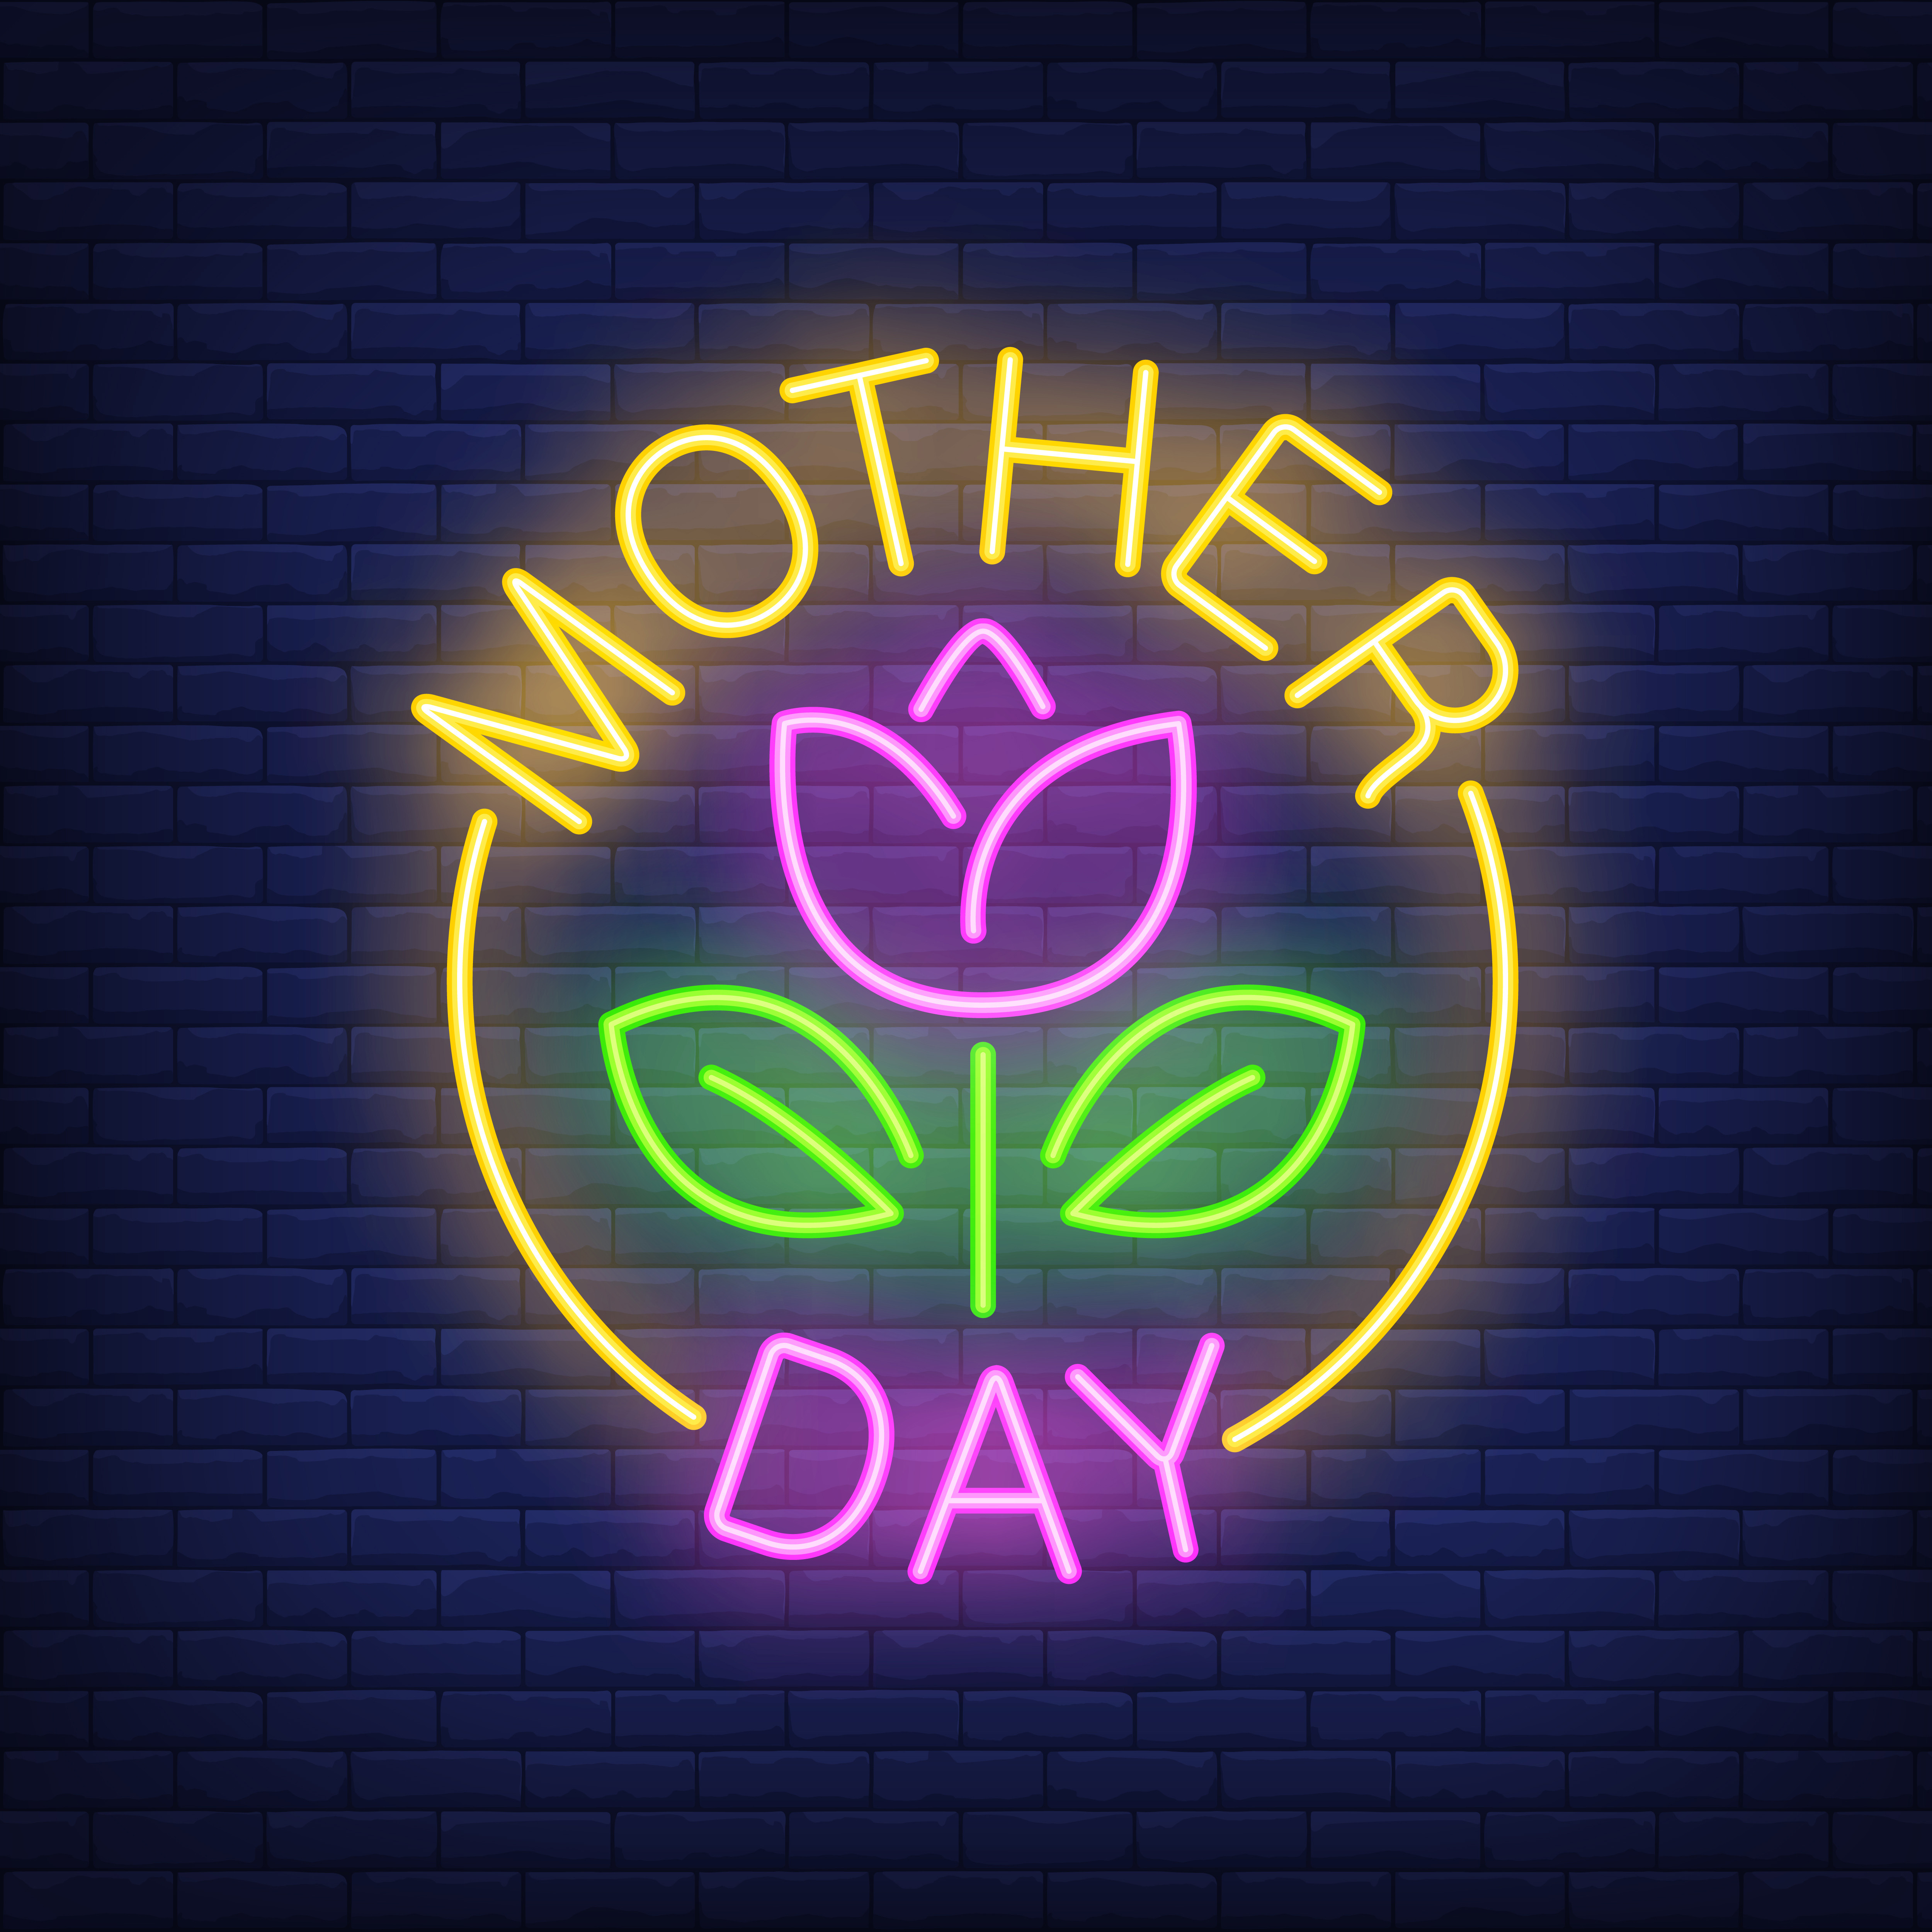 Mother day neon sign. flower with leaves in bright yellow round.